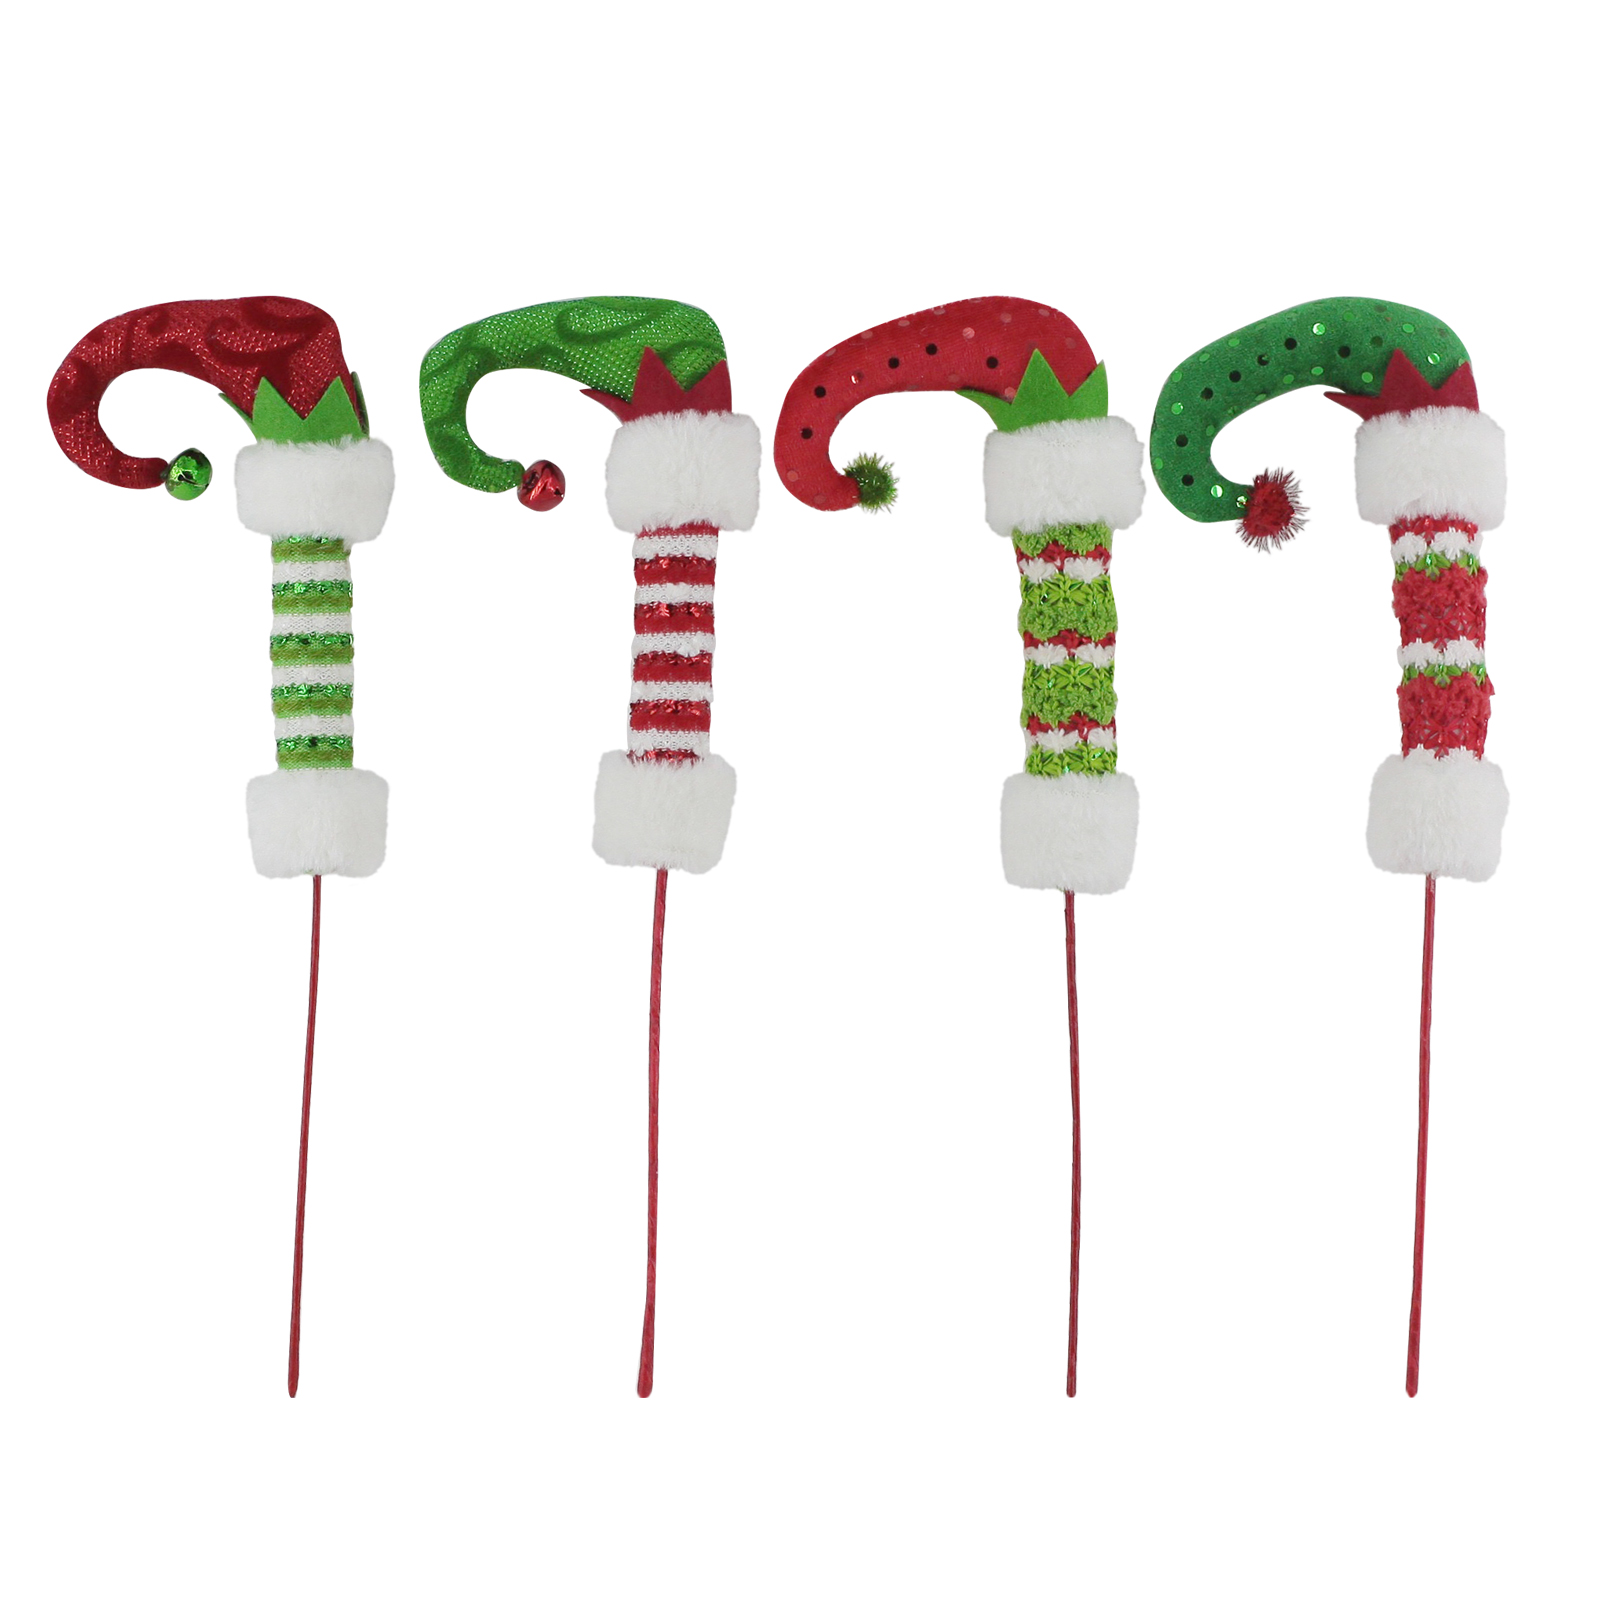 Buy the Assorted Elf Legs Pick By Ashland™ at Michaels